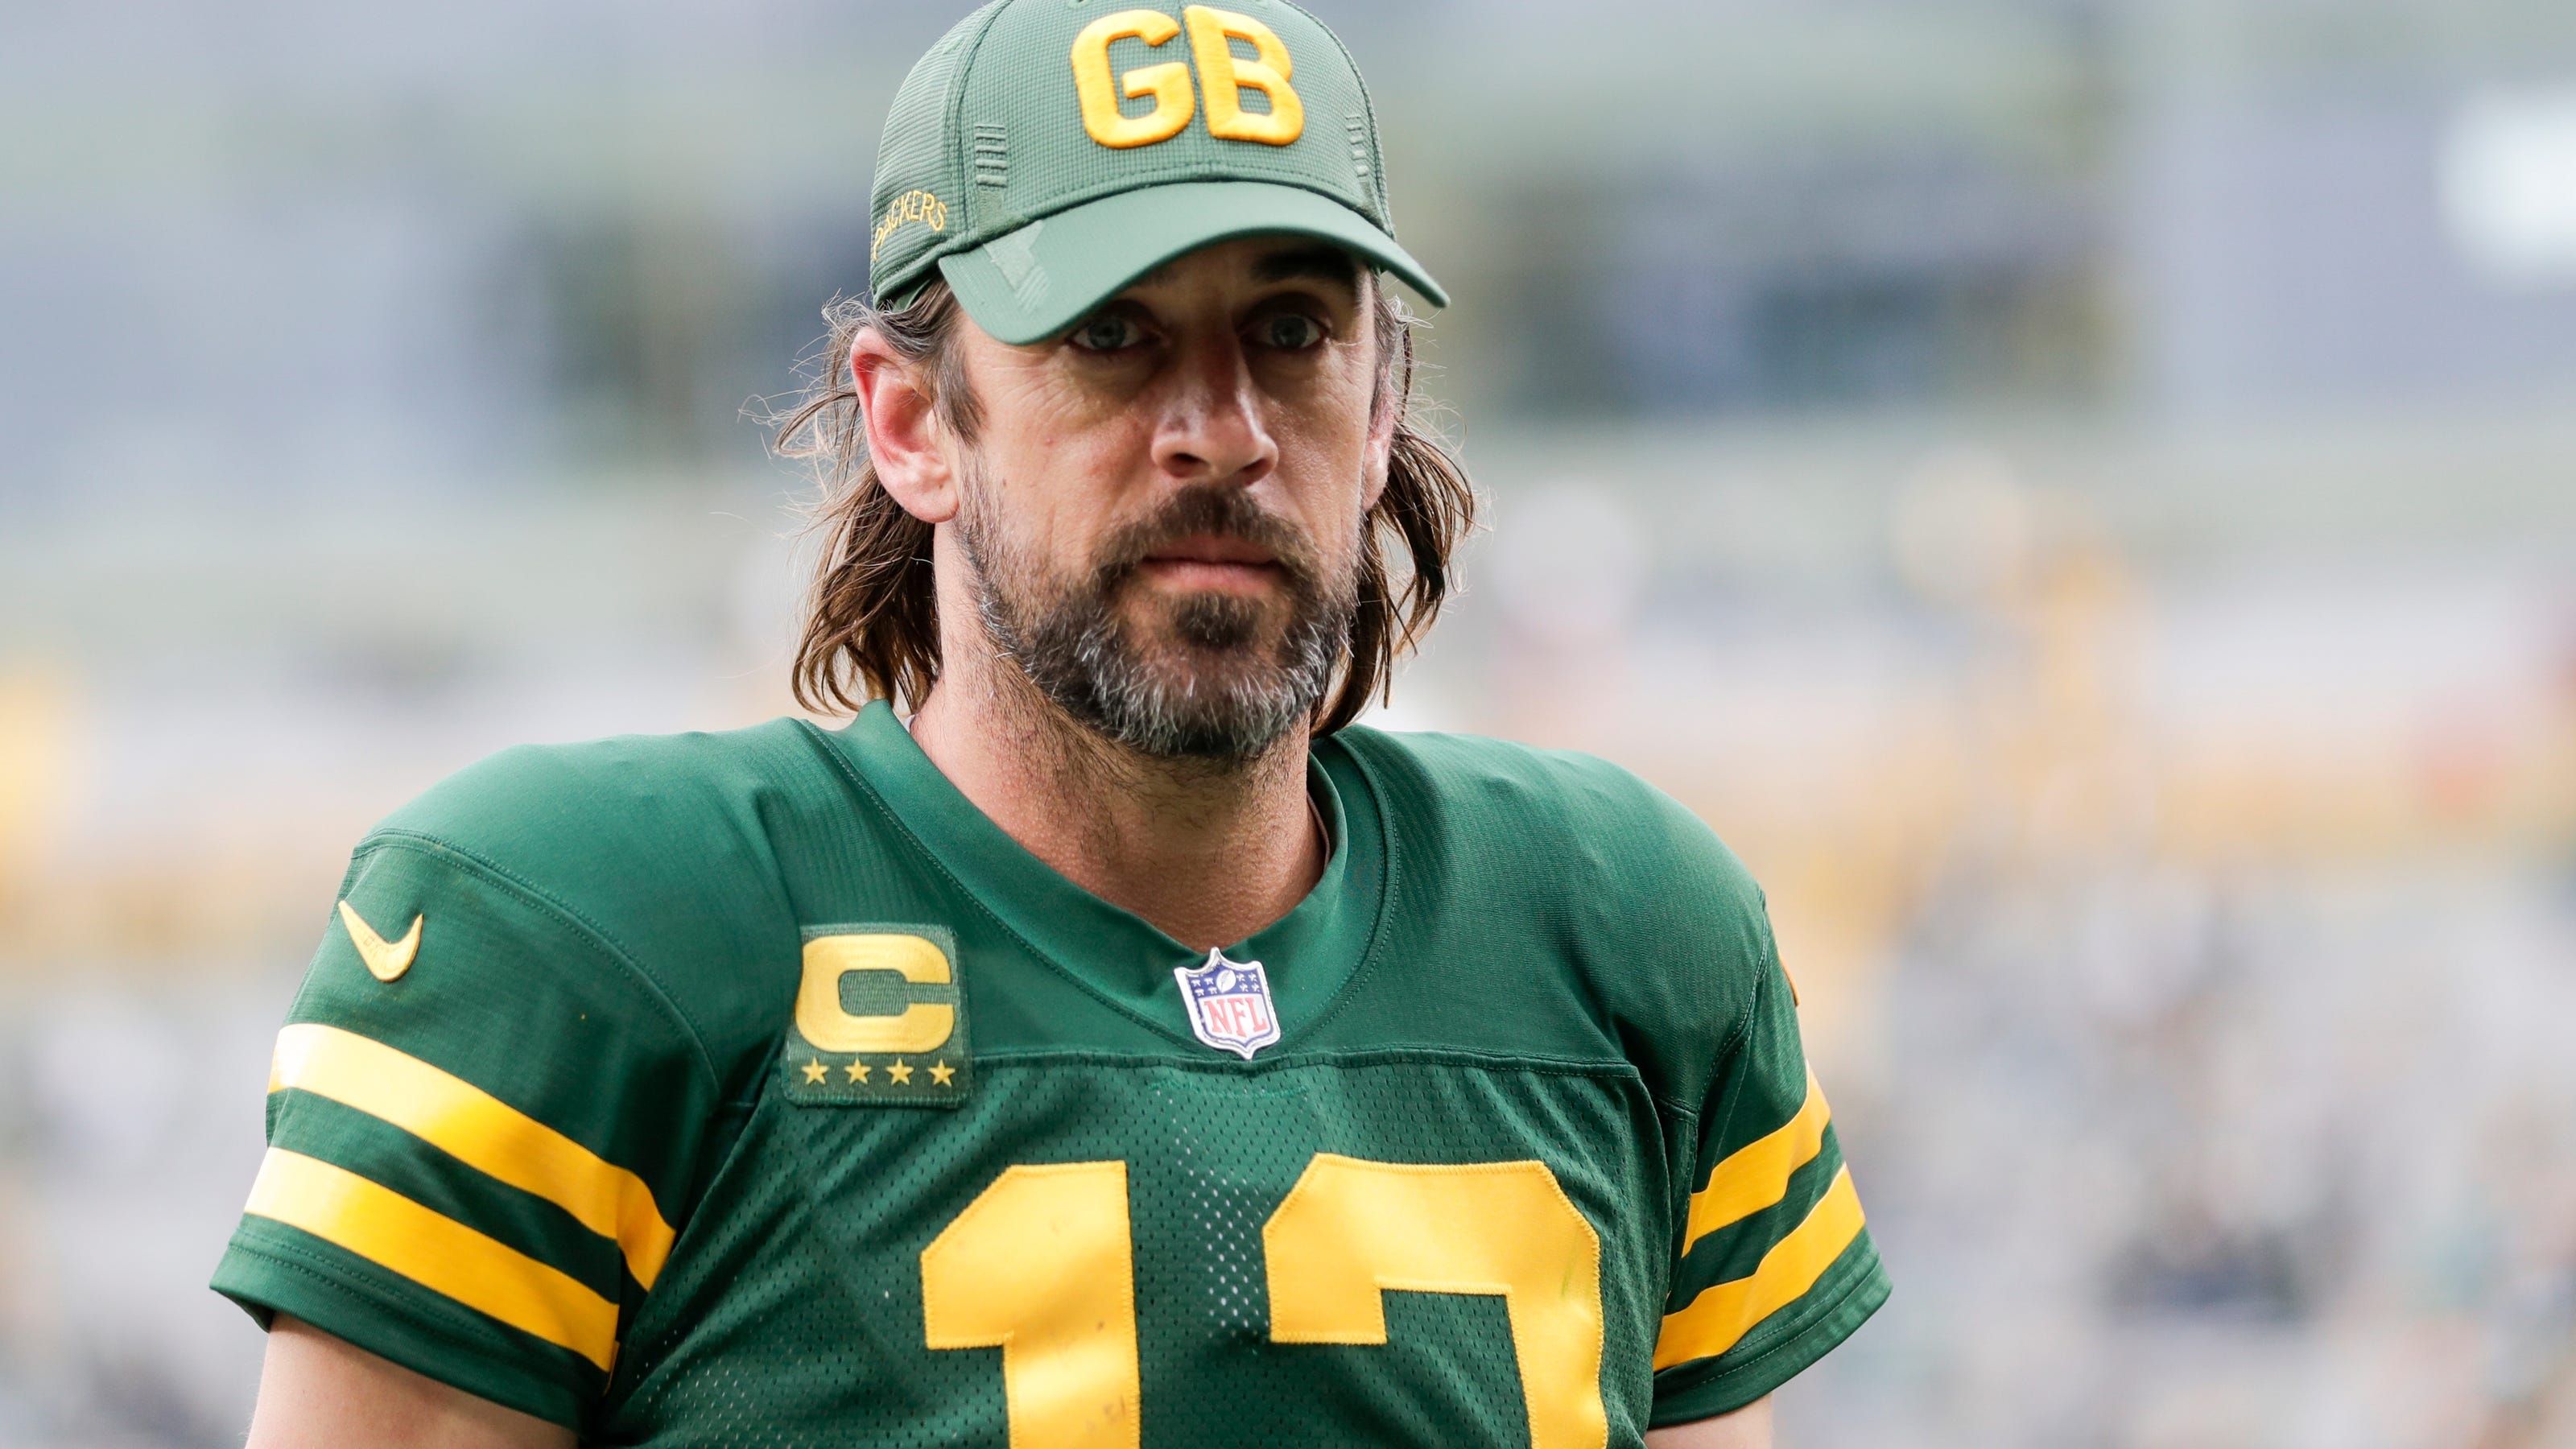 Aaron Rodgers' Halloween costume odds have 'The Dude' as the favorite